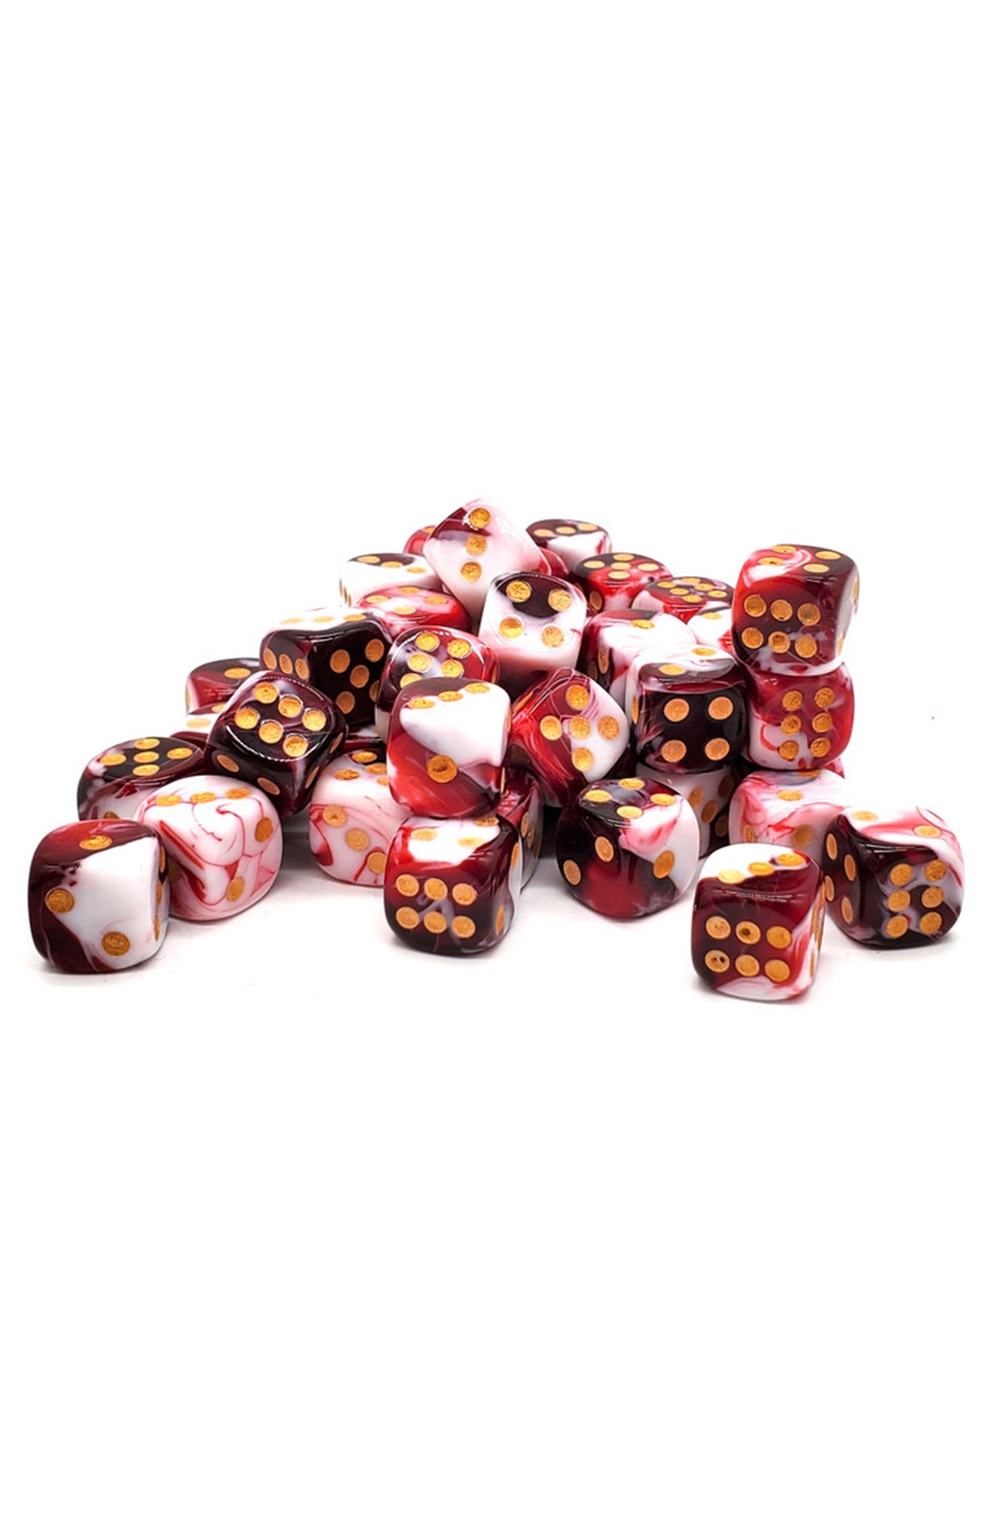 Old School Bag O' D6's 12Mm 50Ct: Vorpal - Blood Red & White